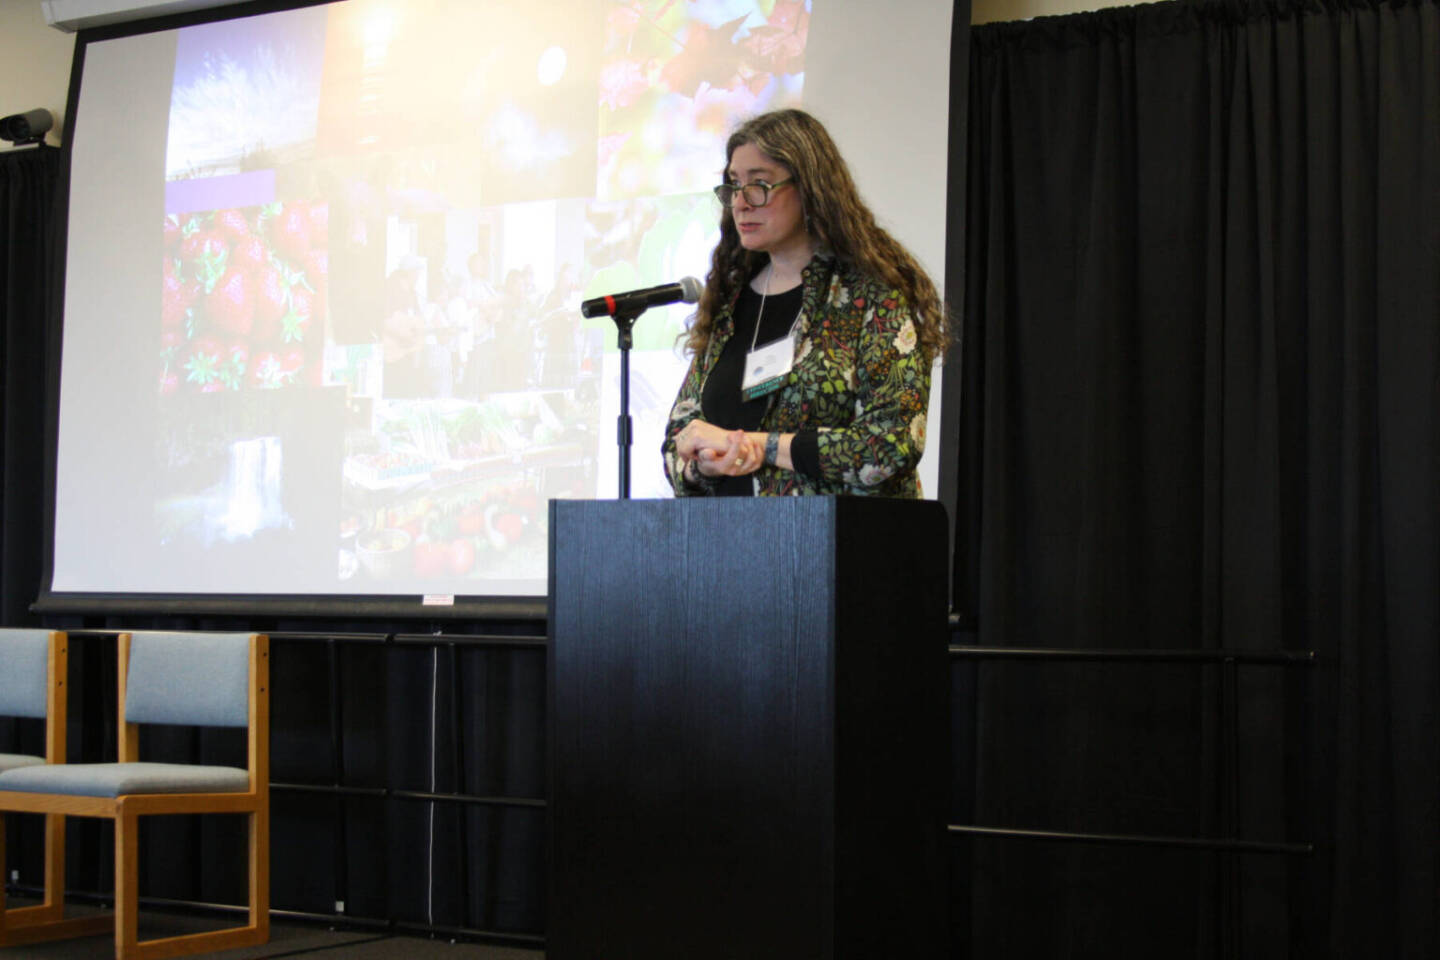 Erin Coughlin Hollowell, in her role as conference director, welcomes Kachemak Bay Writers’ Conference attendees and faculty on Saturday, May 13, 2023 at Kachemak Bay Campus in Homer, Alaska. (Delcenia Cosman/Homer News)